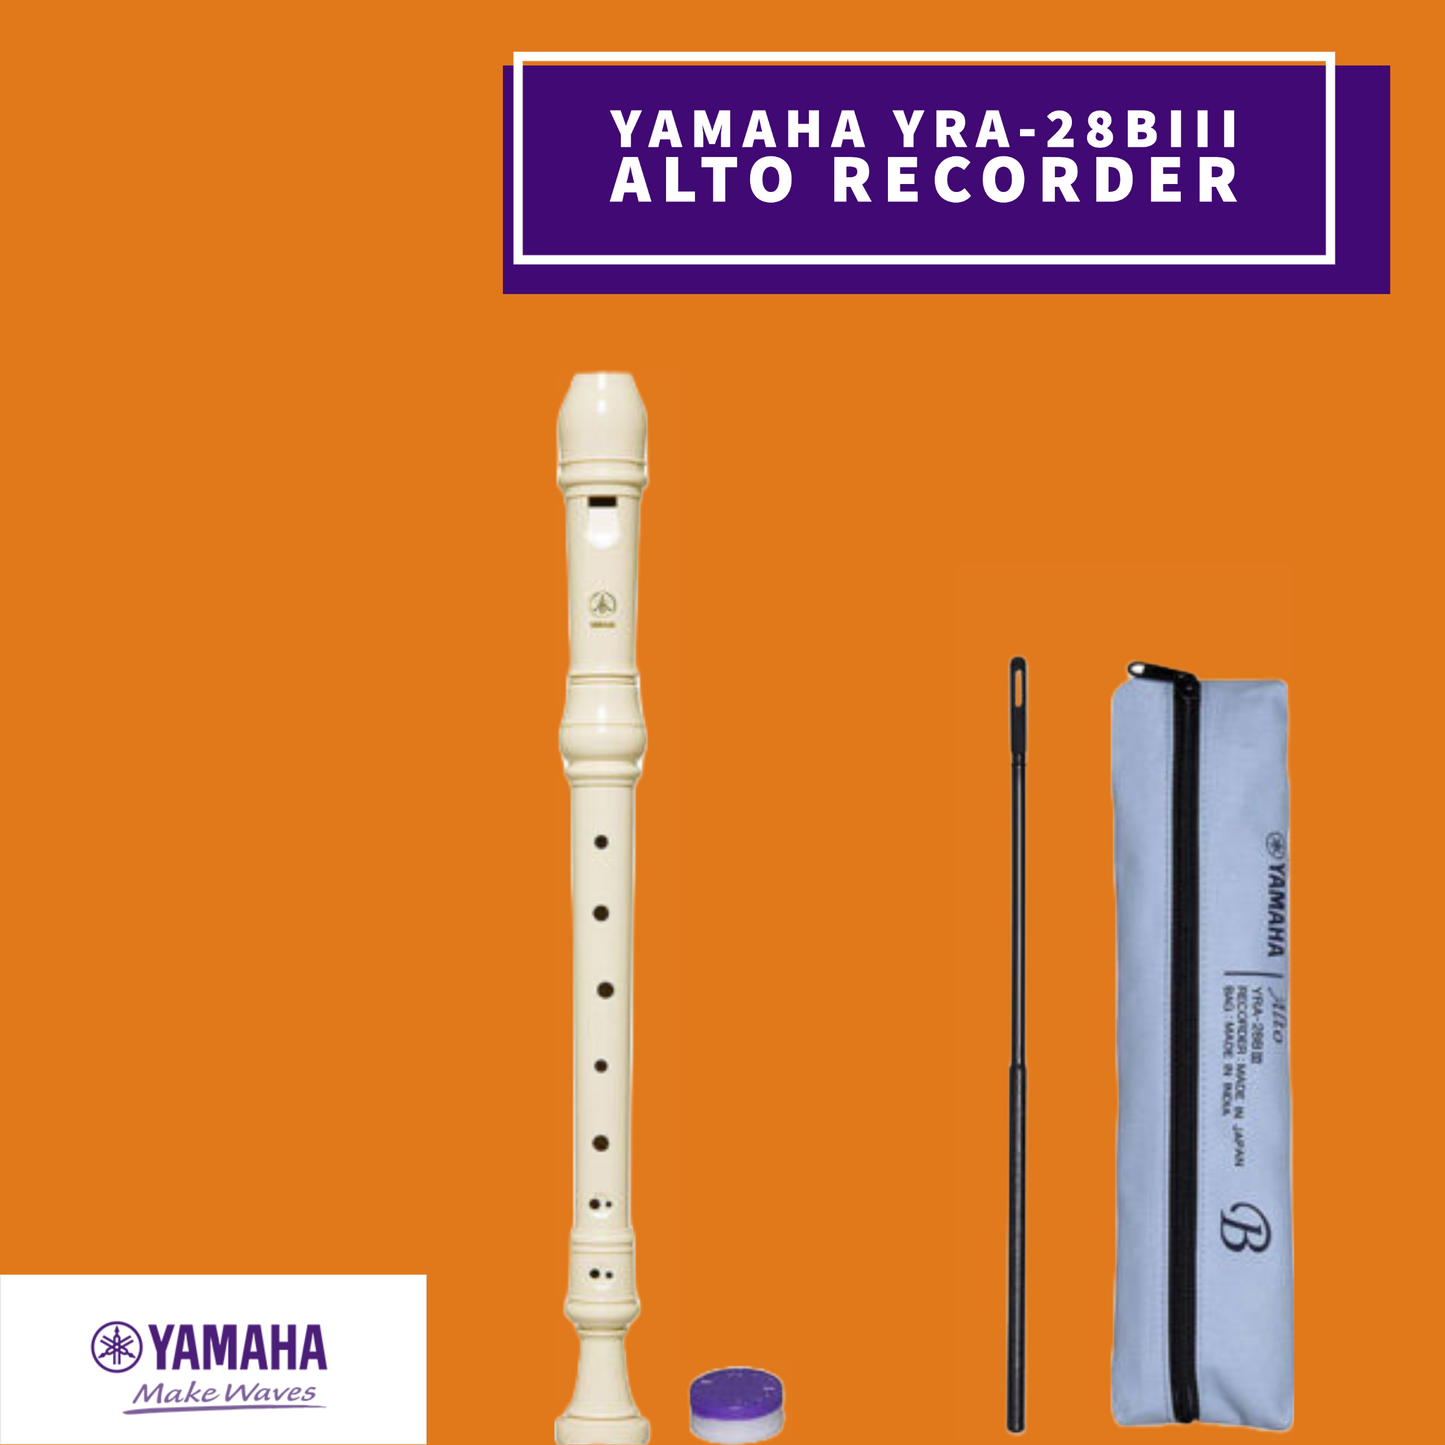 Yamaha Yra-28Biii Alto 3 Piece Abs Resin Recorder (Key Of F) Musical Instruments & Accessories